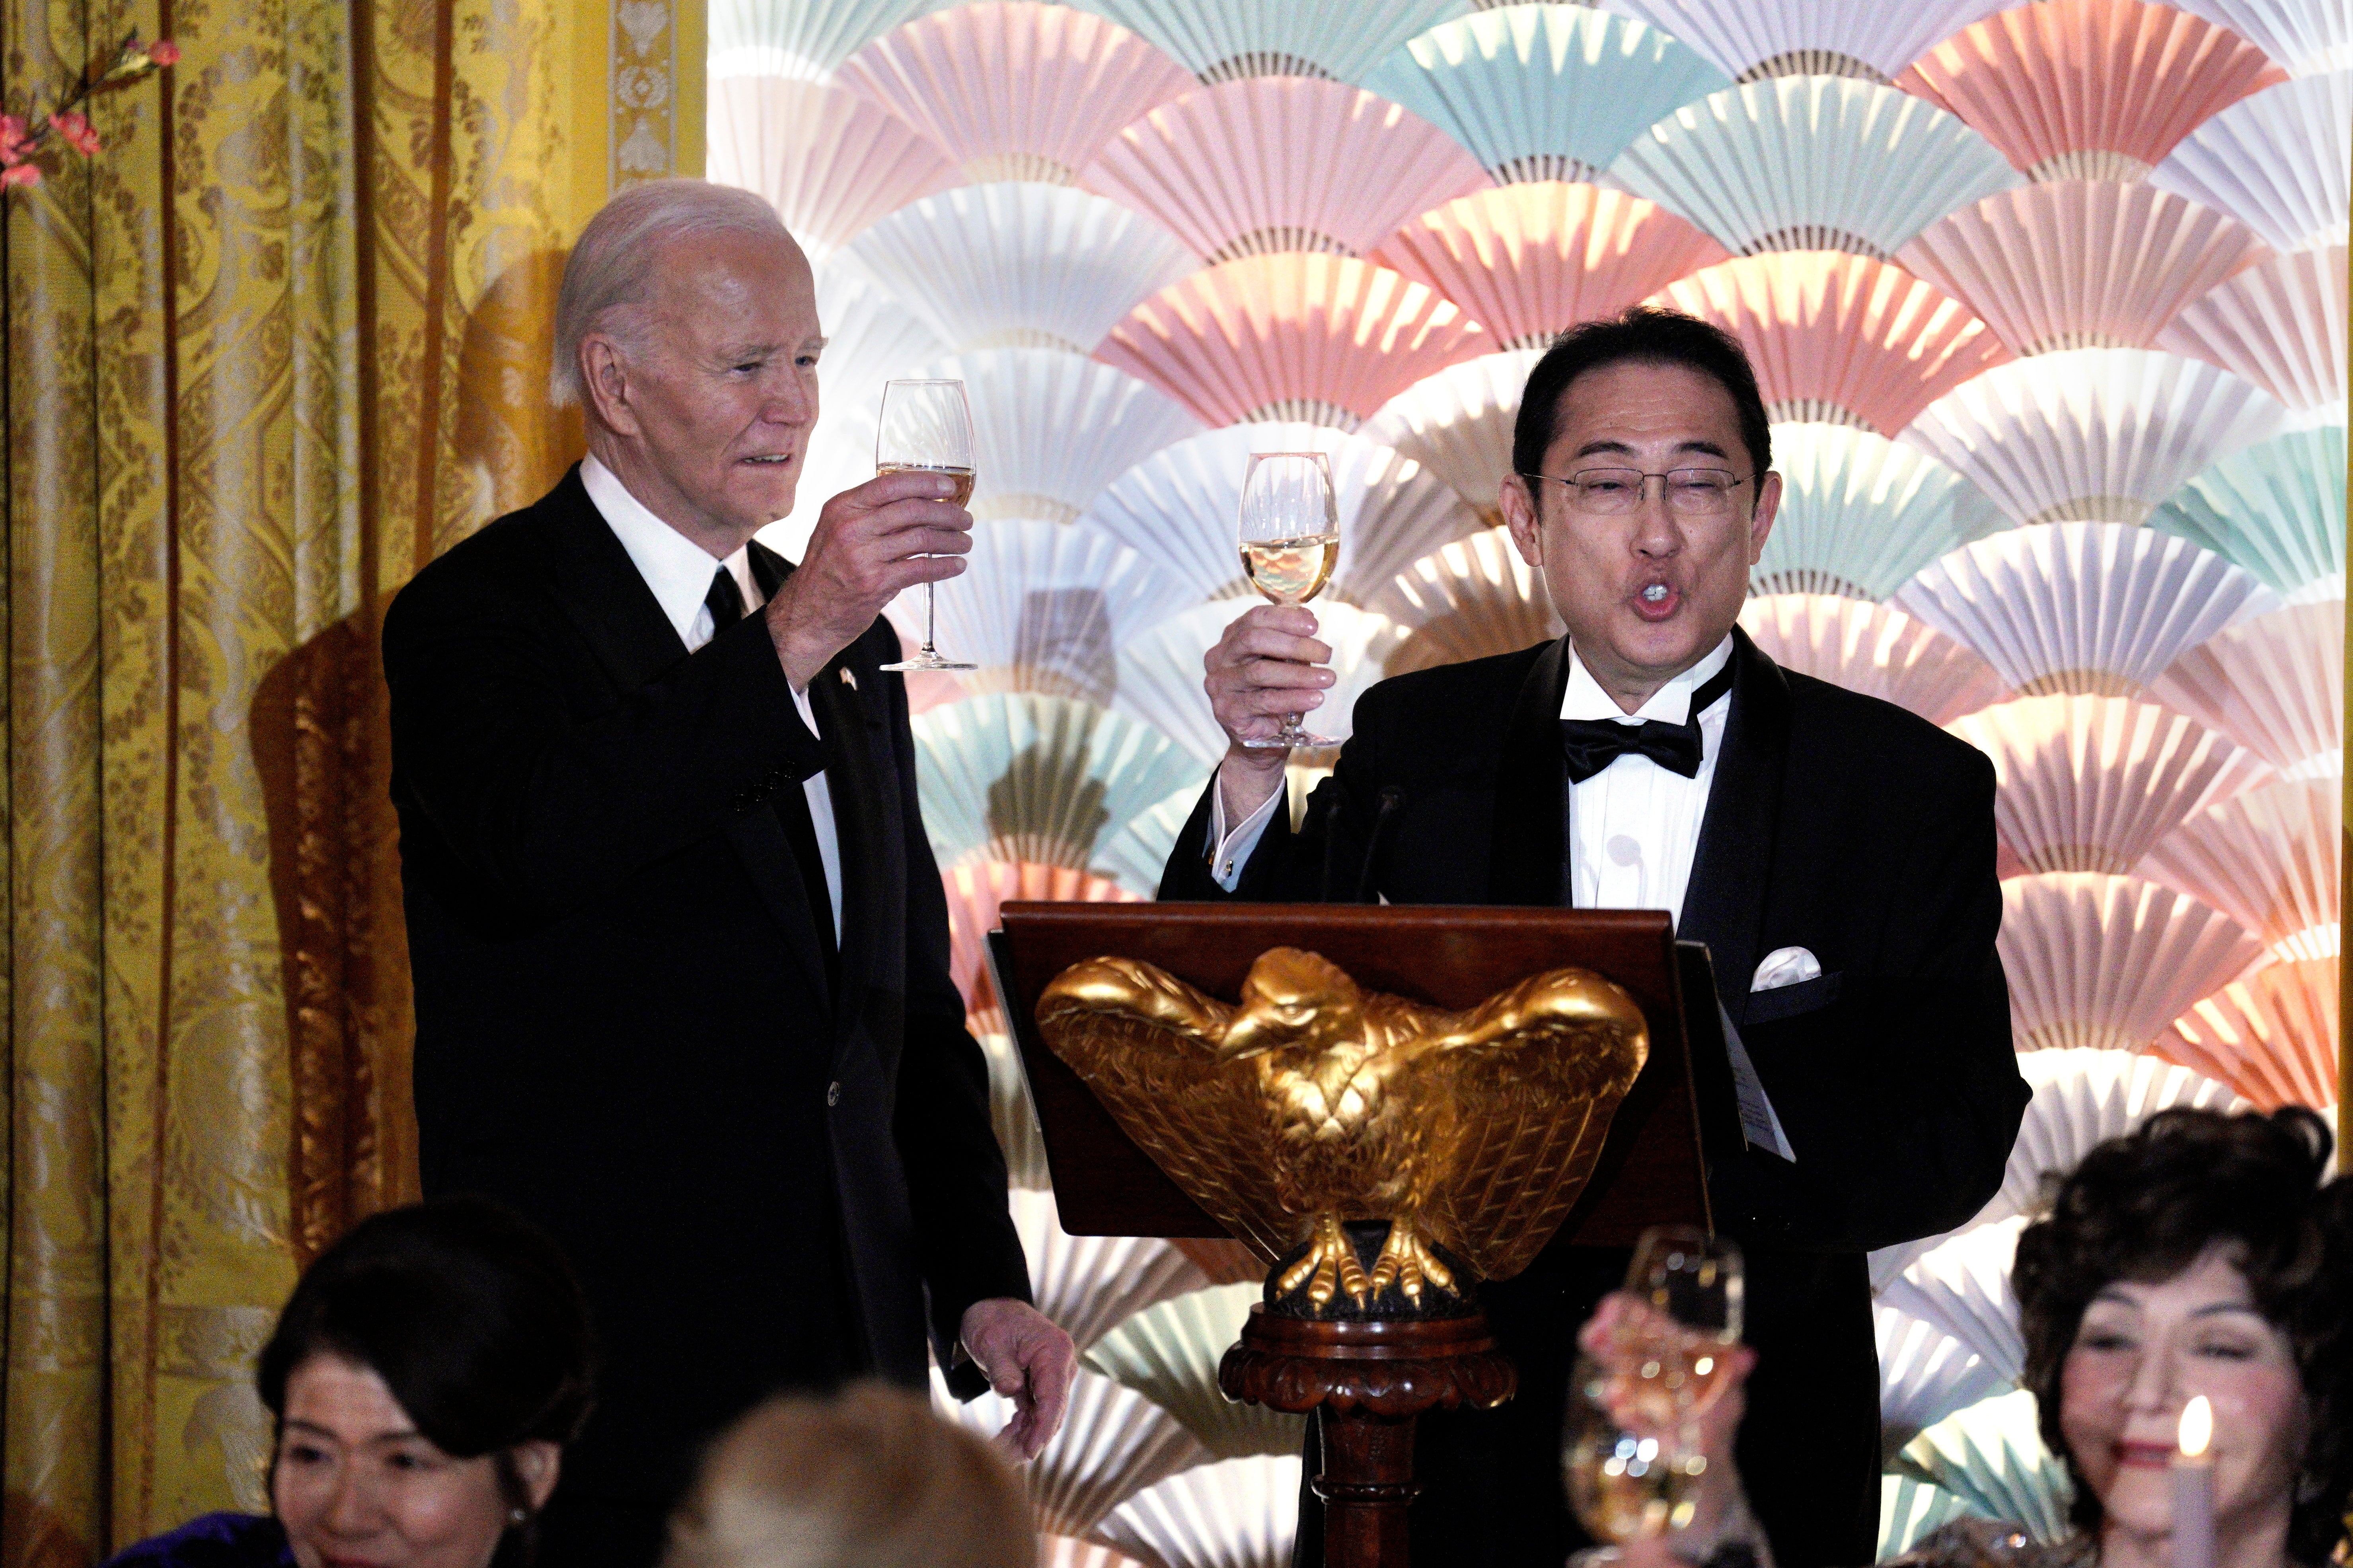 Both Mr Biden and Mr Kishida took to the stage for a lighthearted, warm address to the crowd, where the former spoke of the two nations’ ‘friendship’ and the latter invoked an iconic phrase from ‘Star Trek’